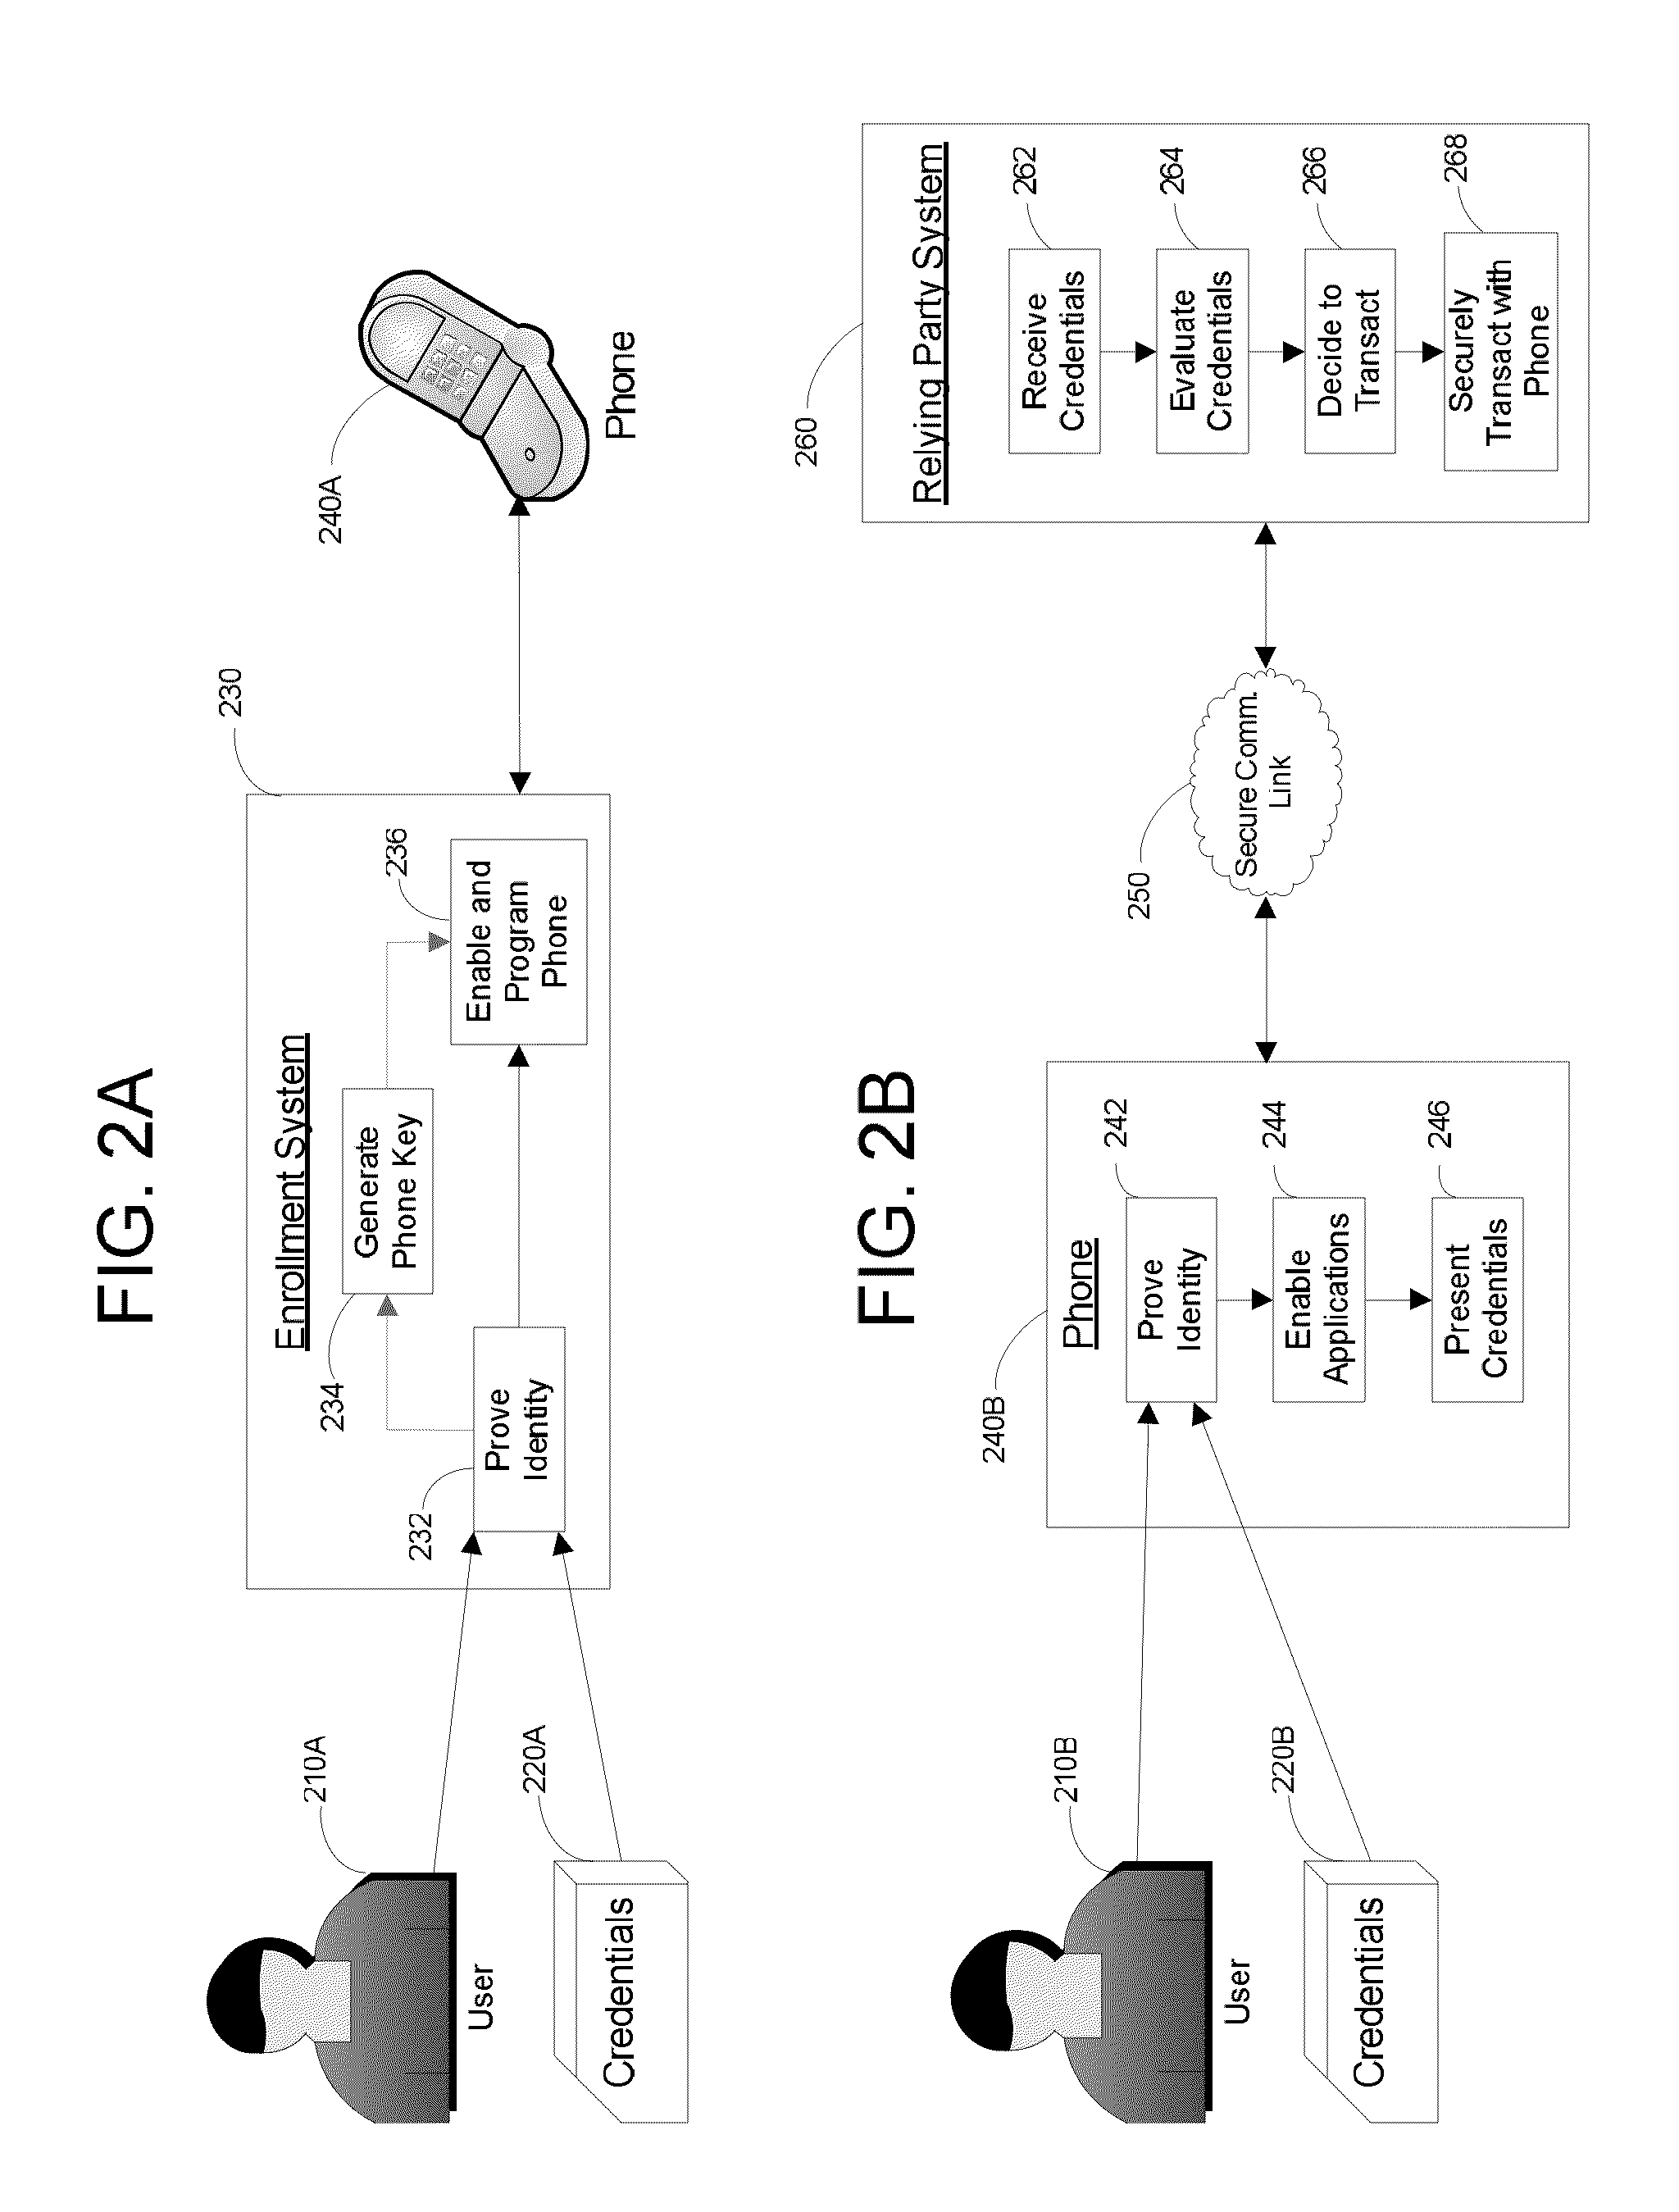 Apparatus and Methods for Providing Scalable, Dynamic, Individualized Credential Services Using Mobile Telephones